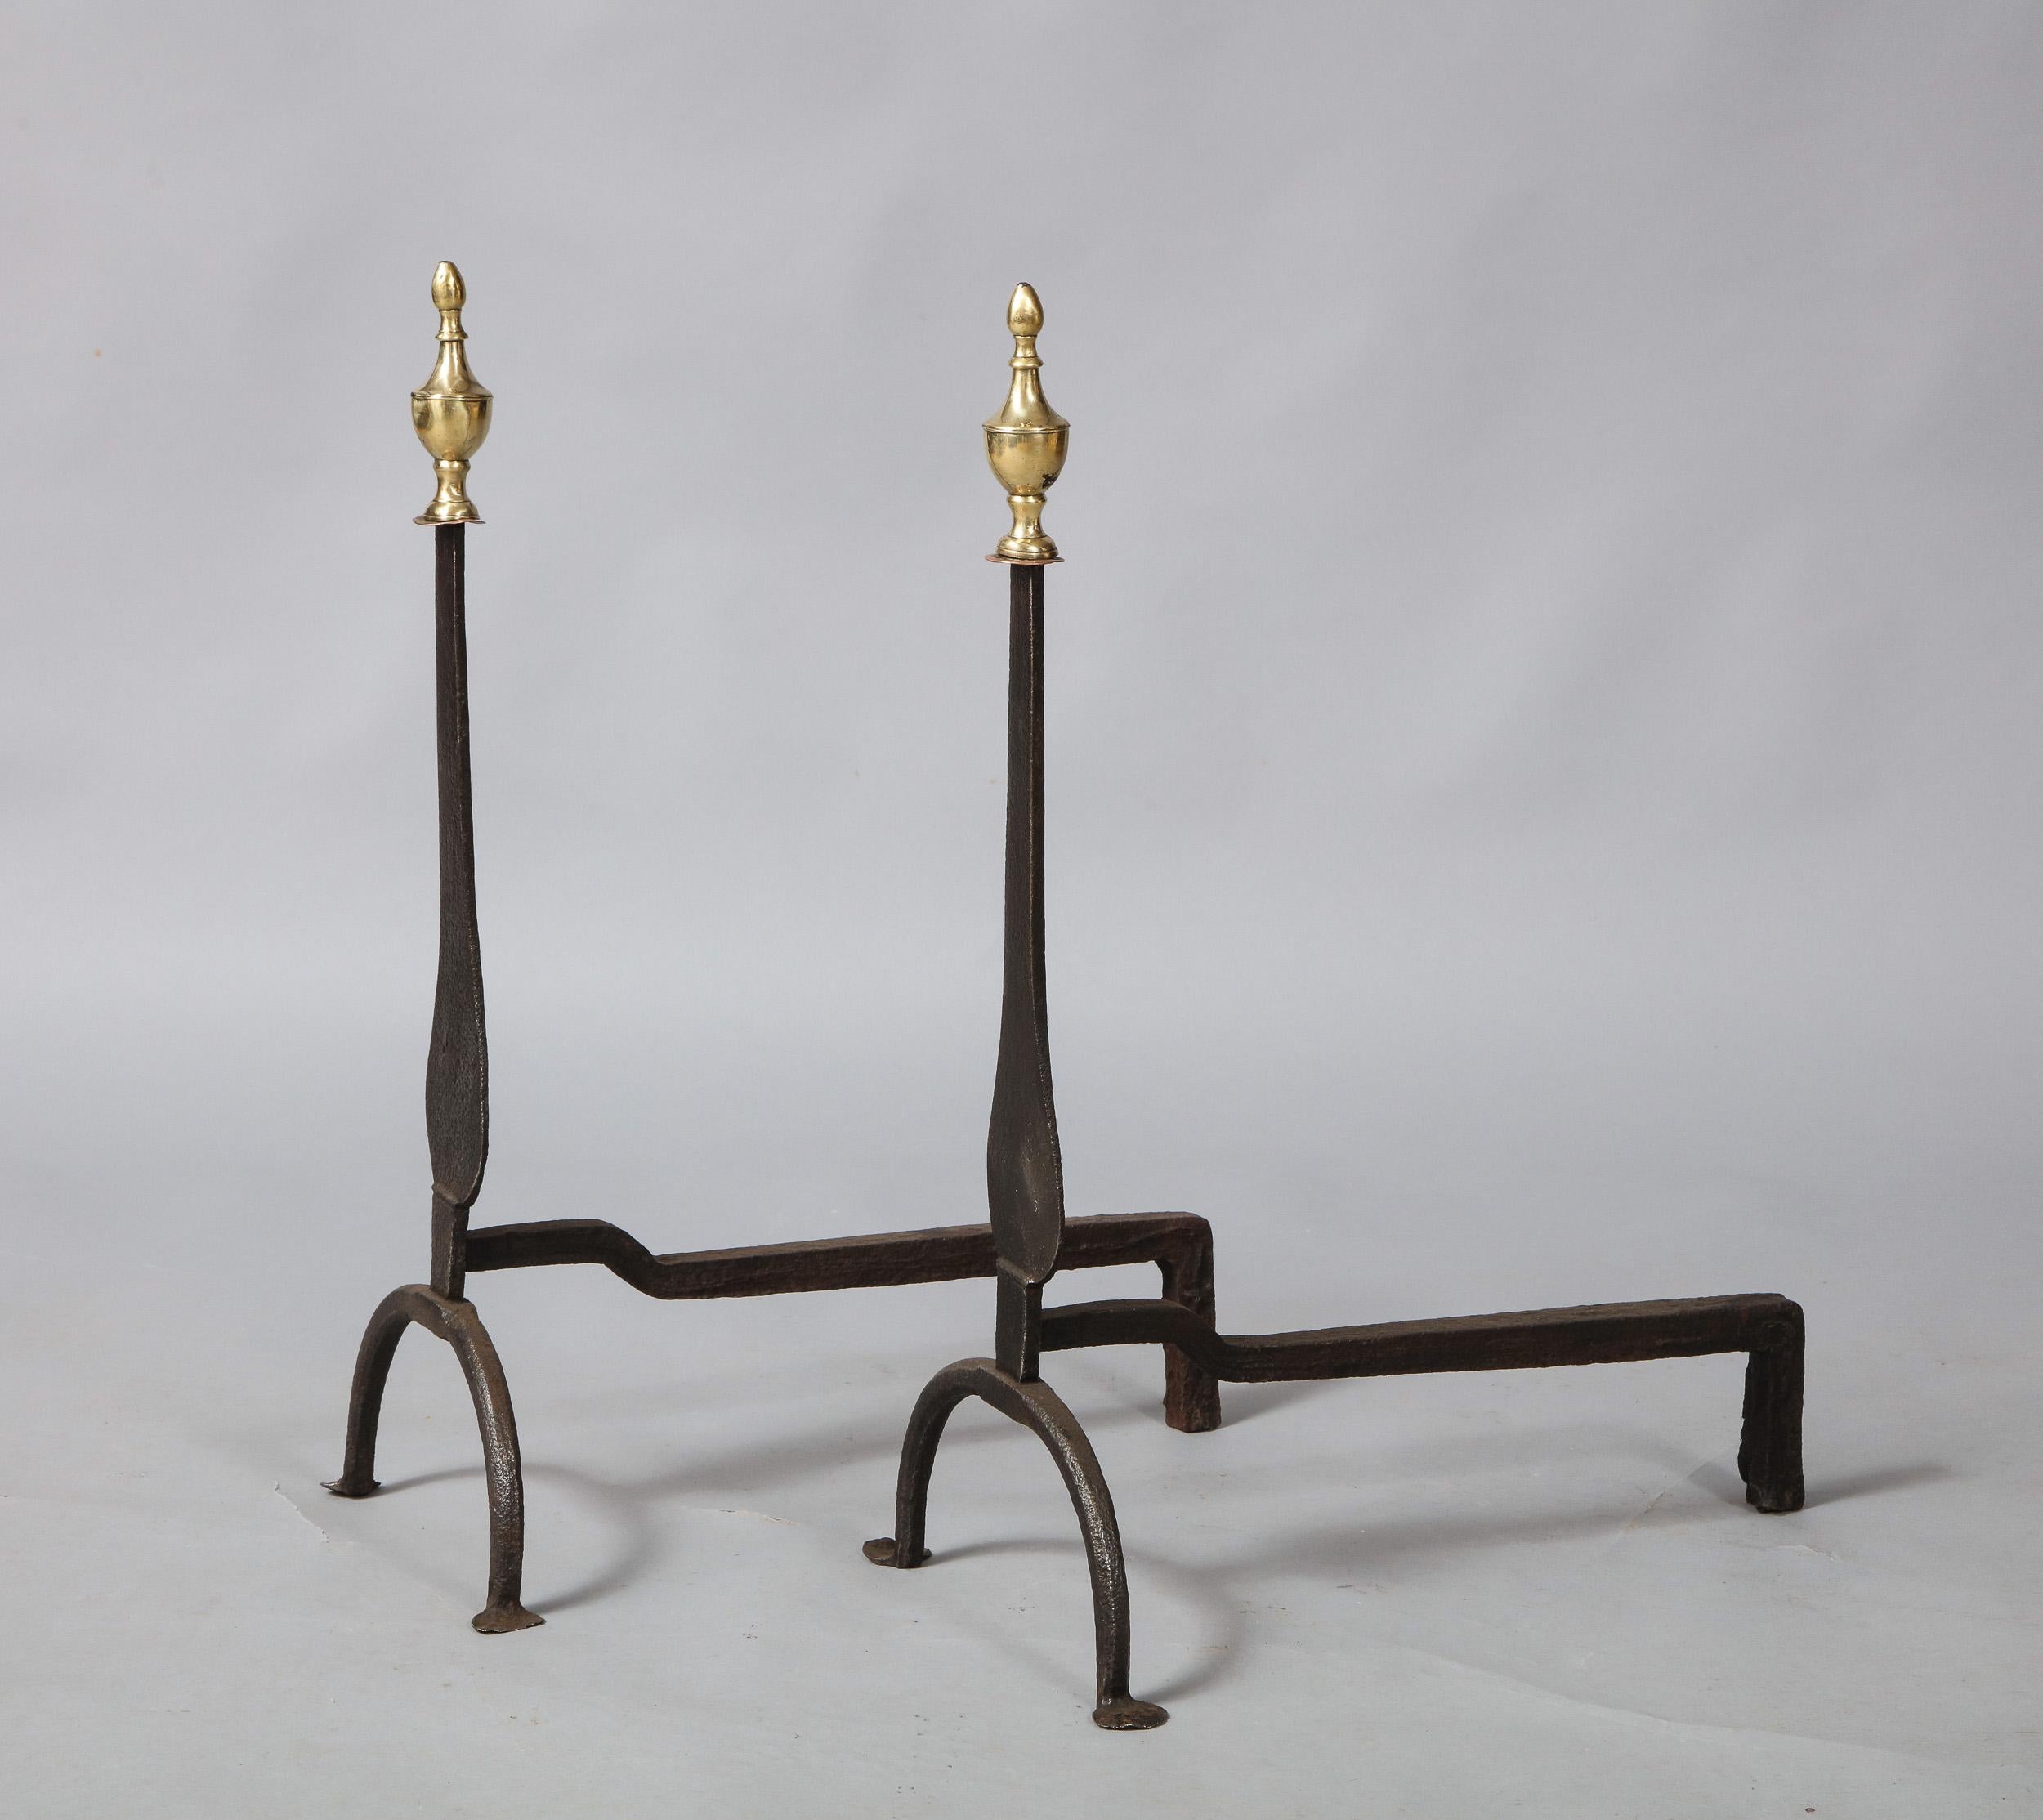 Federal Pair of Neoclassical Brass and Iron Andirons